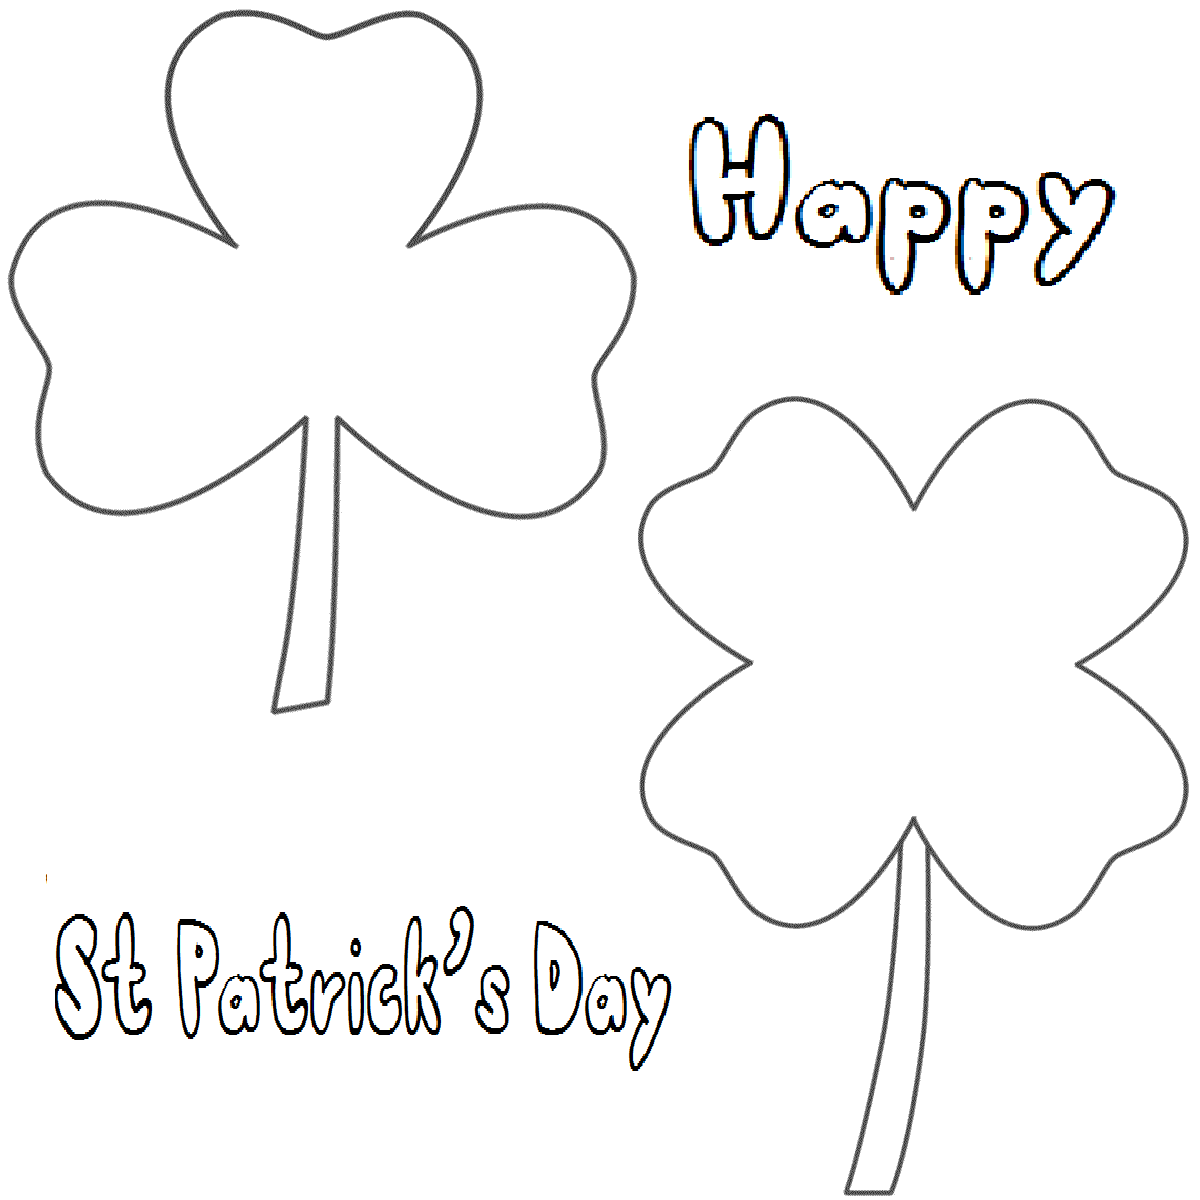 Printable Three Leaf Clover coloring pages